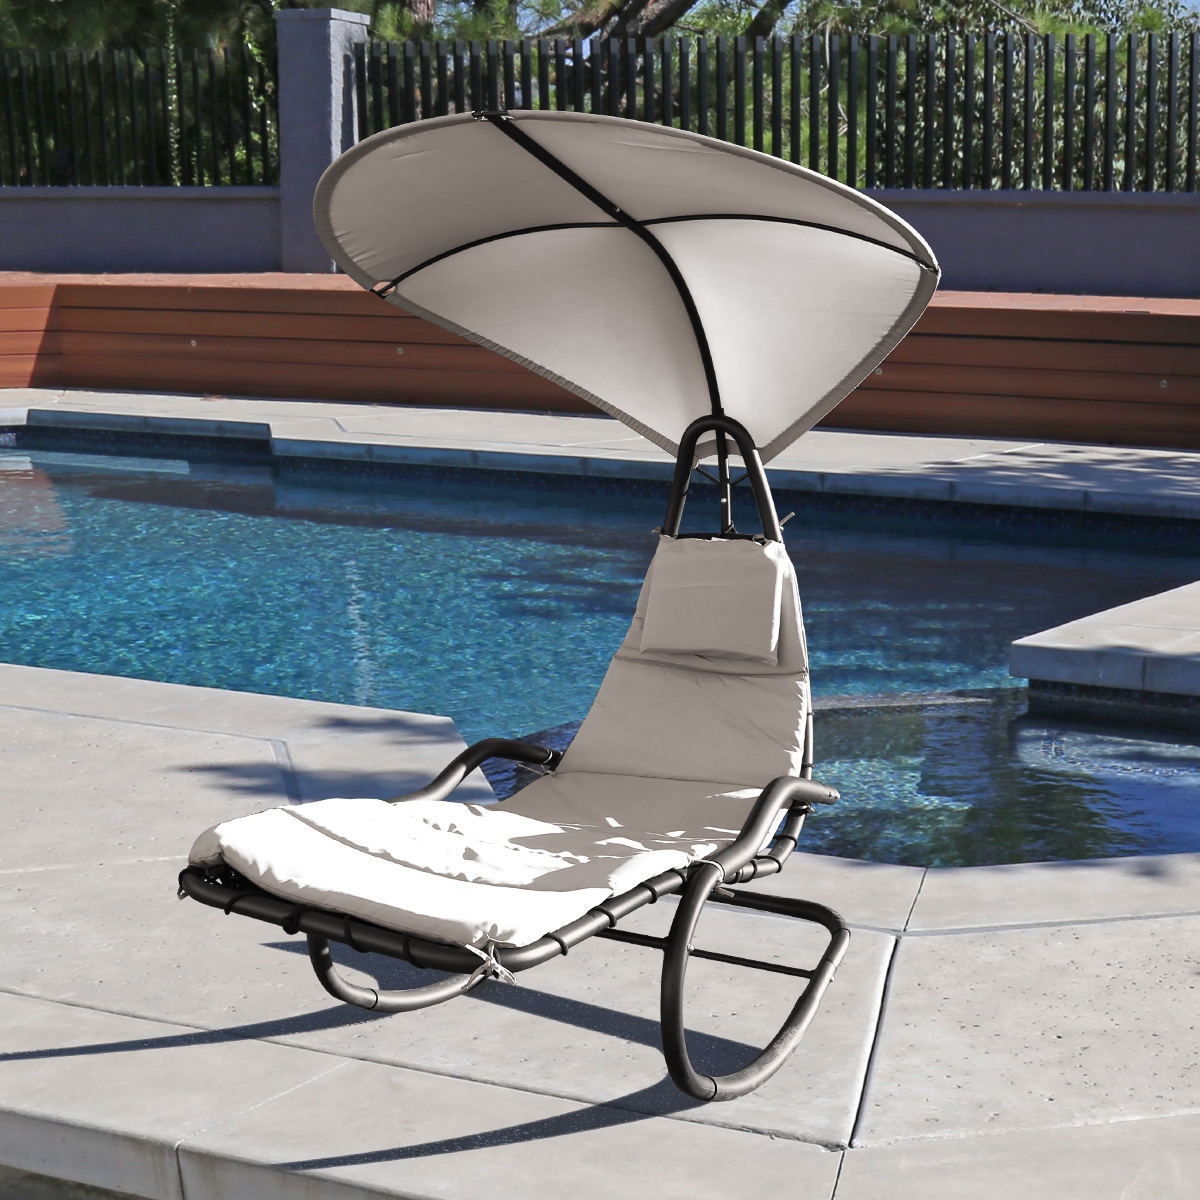 Rocking Hanging Lounge Chair - Curved Chaise Rocking Lounge Chair Swing For Backyard Patio w/ Built-in Pillow Removable Canopy with stand {Beige} - image 2 of 8